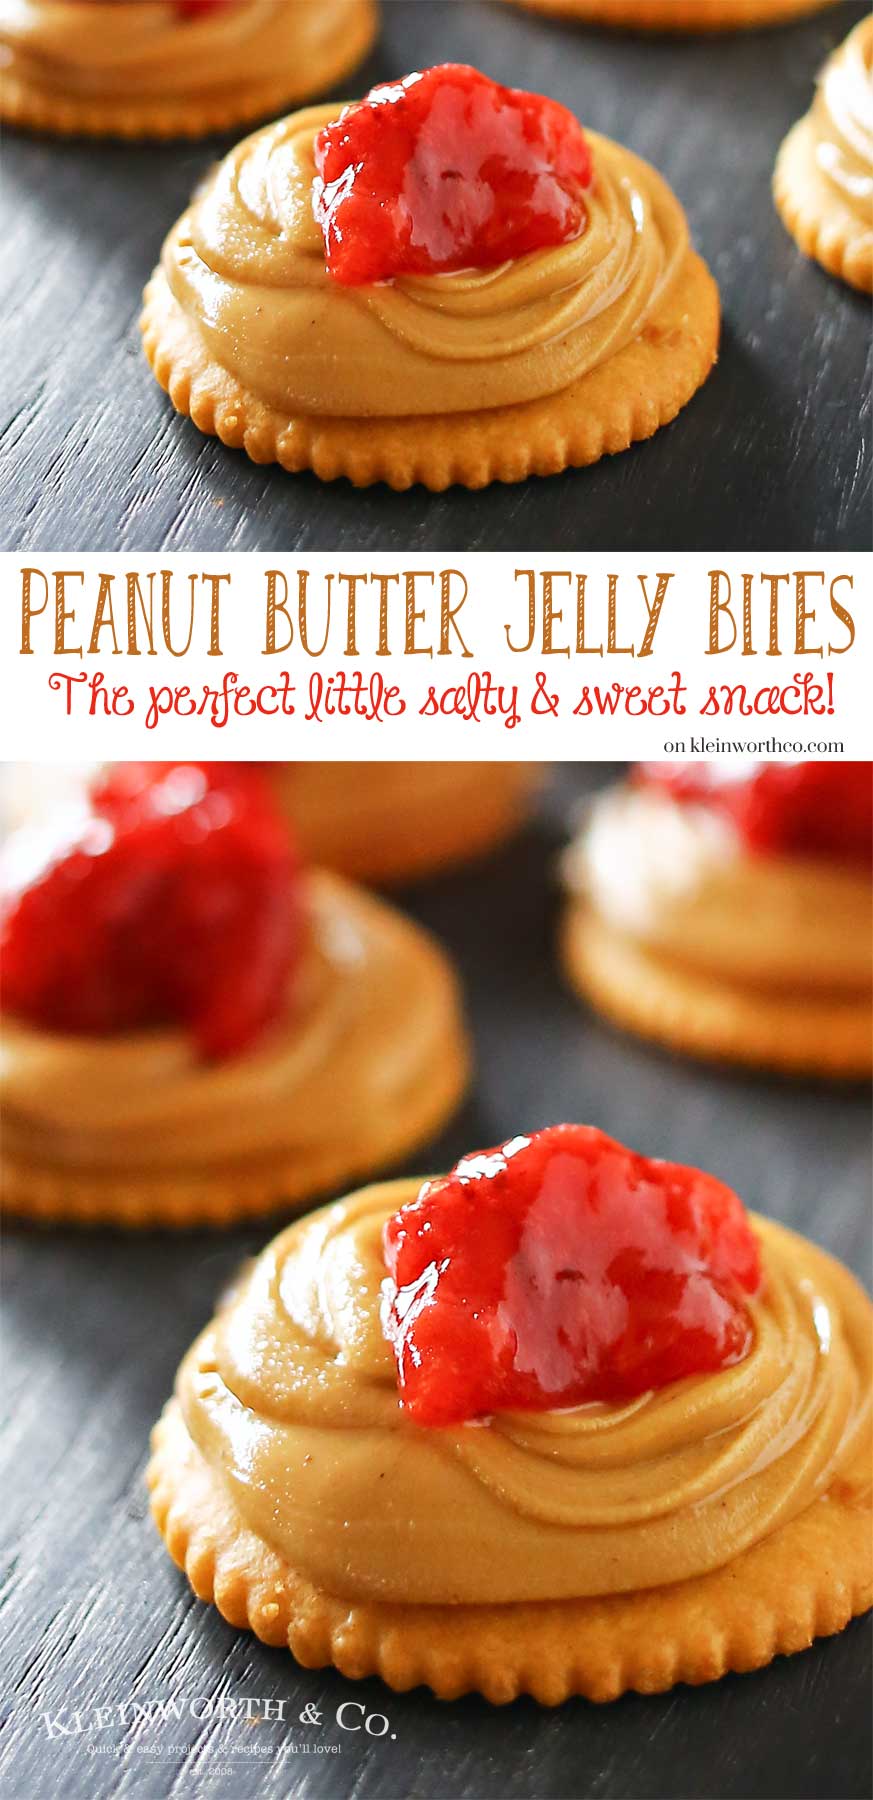 Creamy peanut butter, sweet strawberry jelly & Ritz crackers make Peanut Butter Jelly Bites that are an easy to make snack or appetizer. Salty sweet YUM!